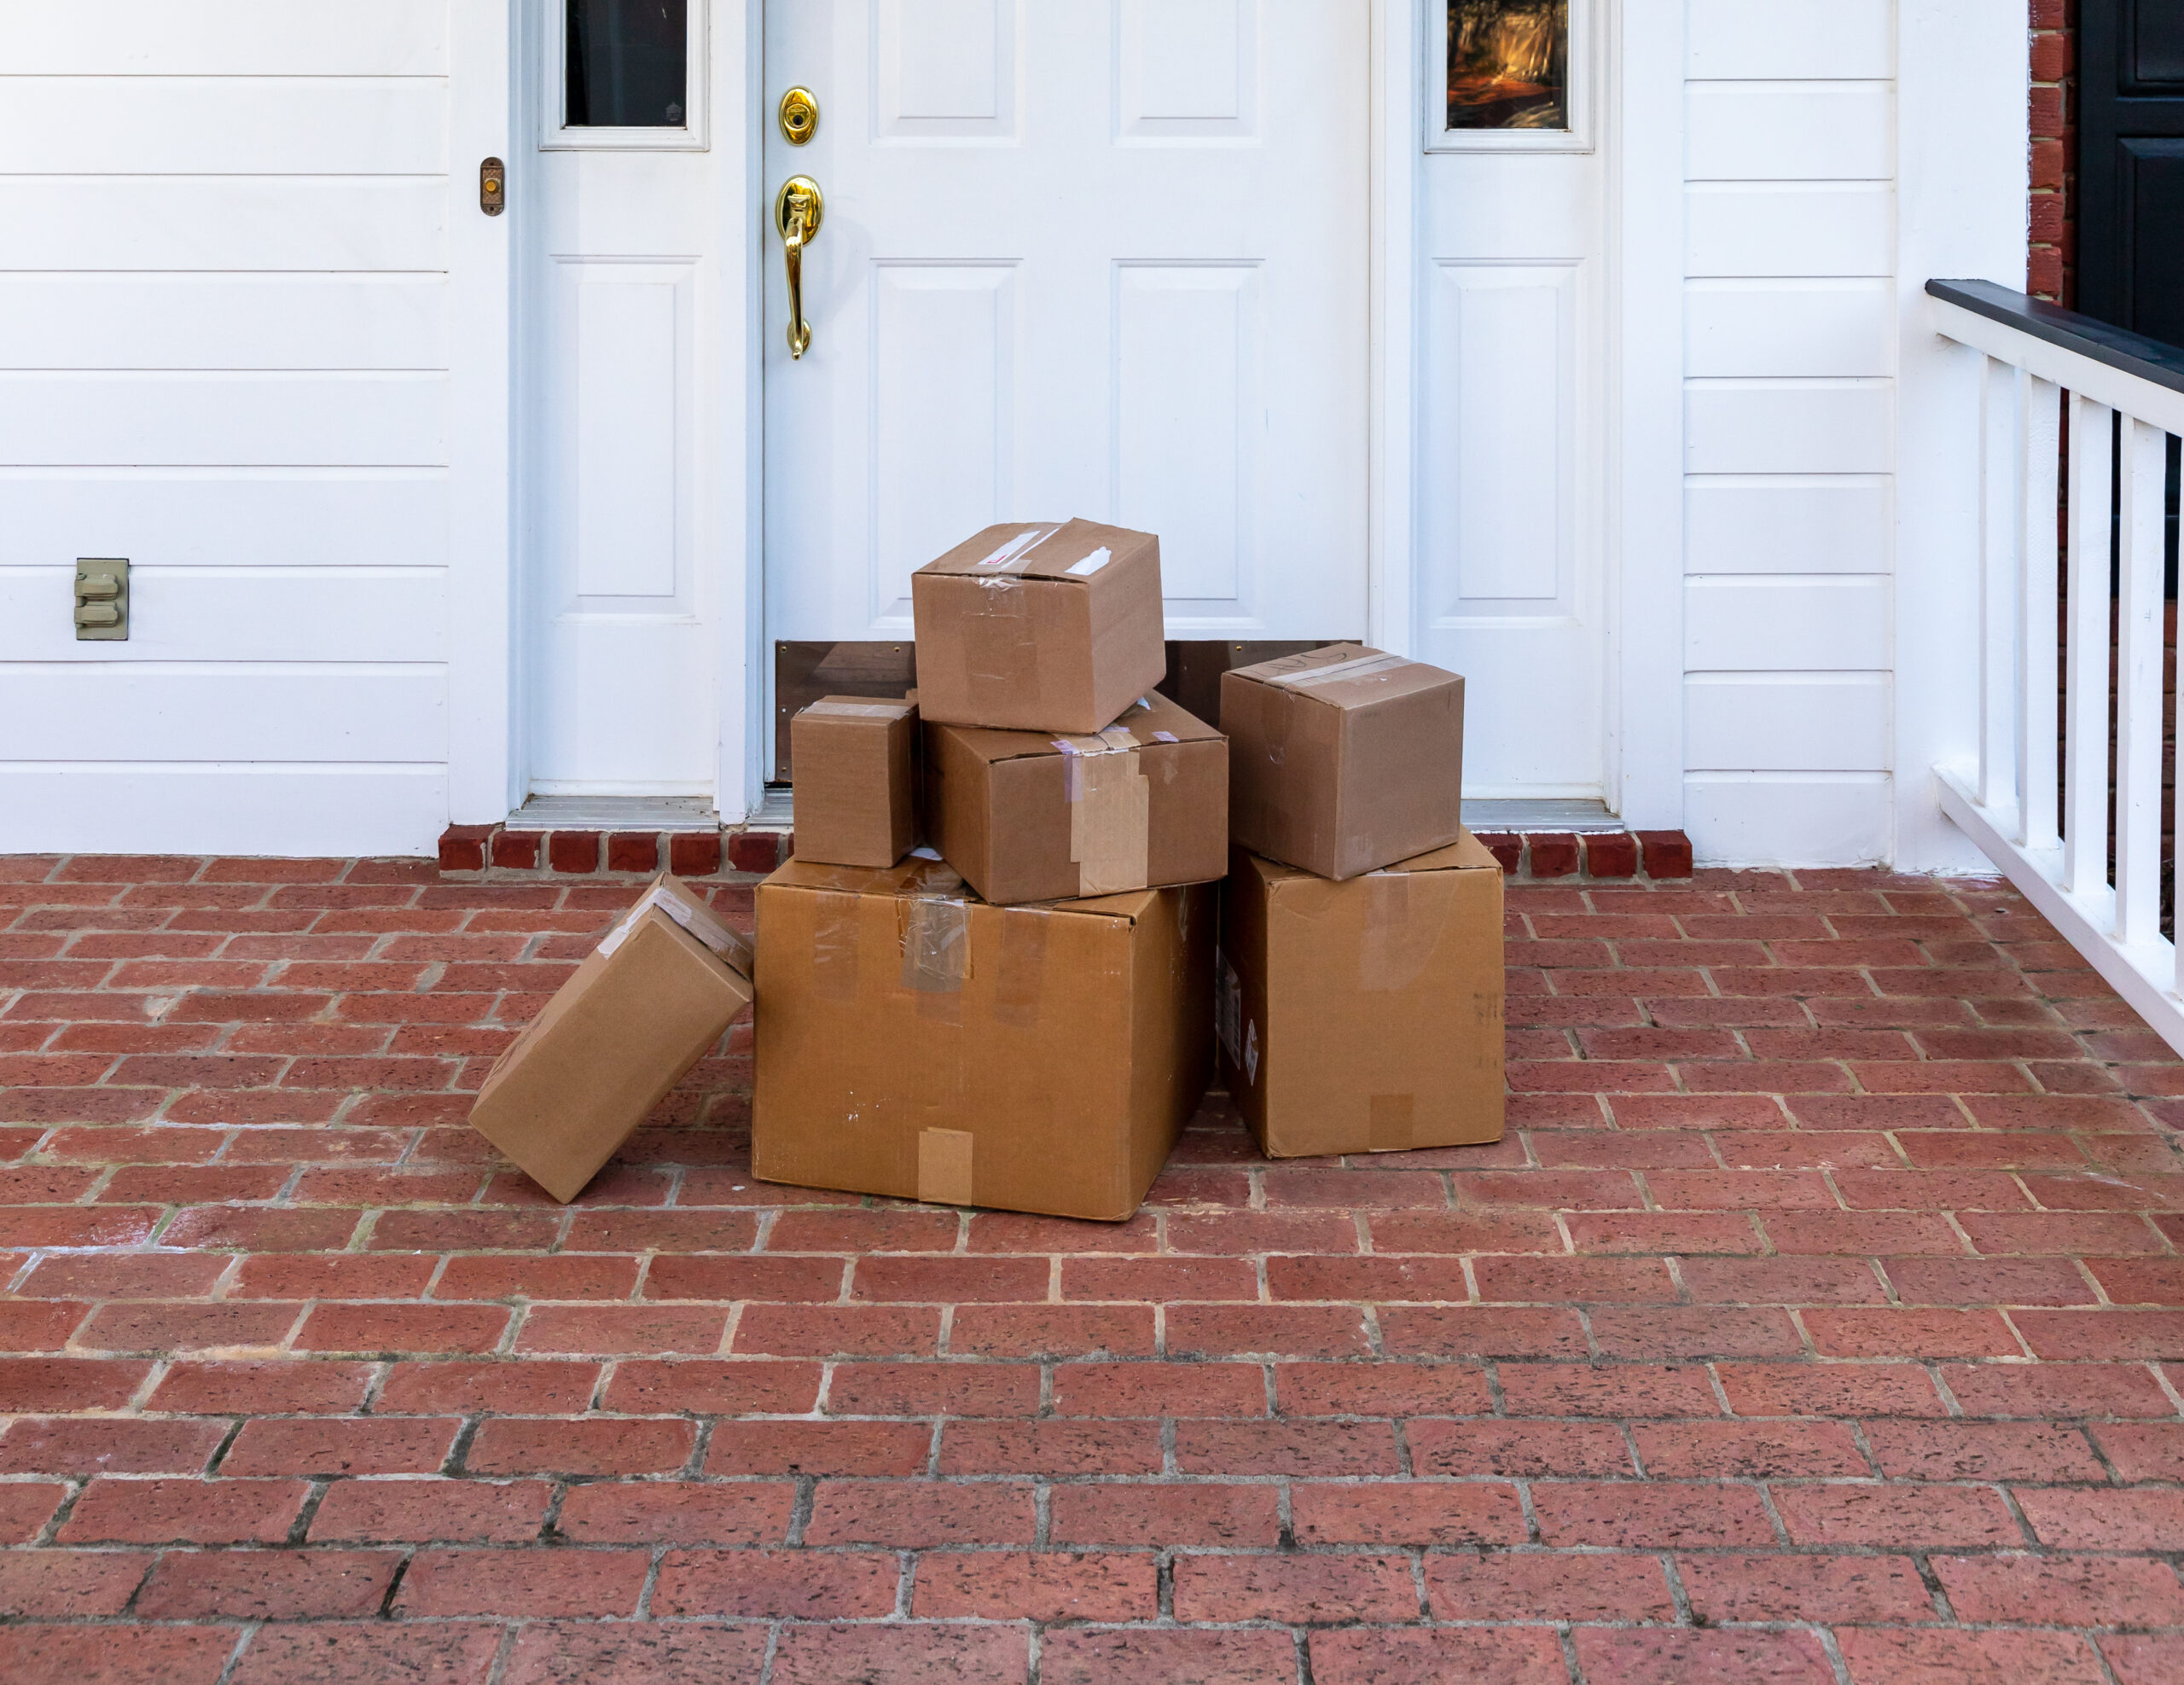 Clothes, shoes and accessories most stolen delivery items, study finds